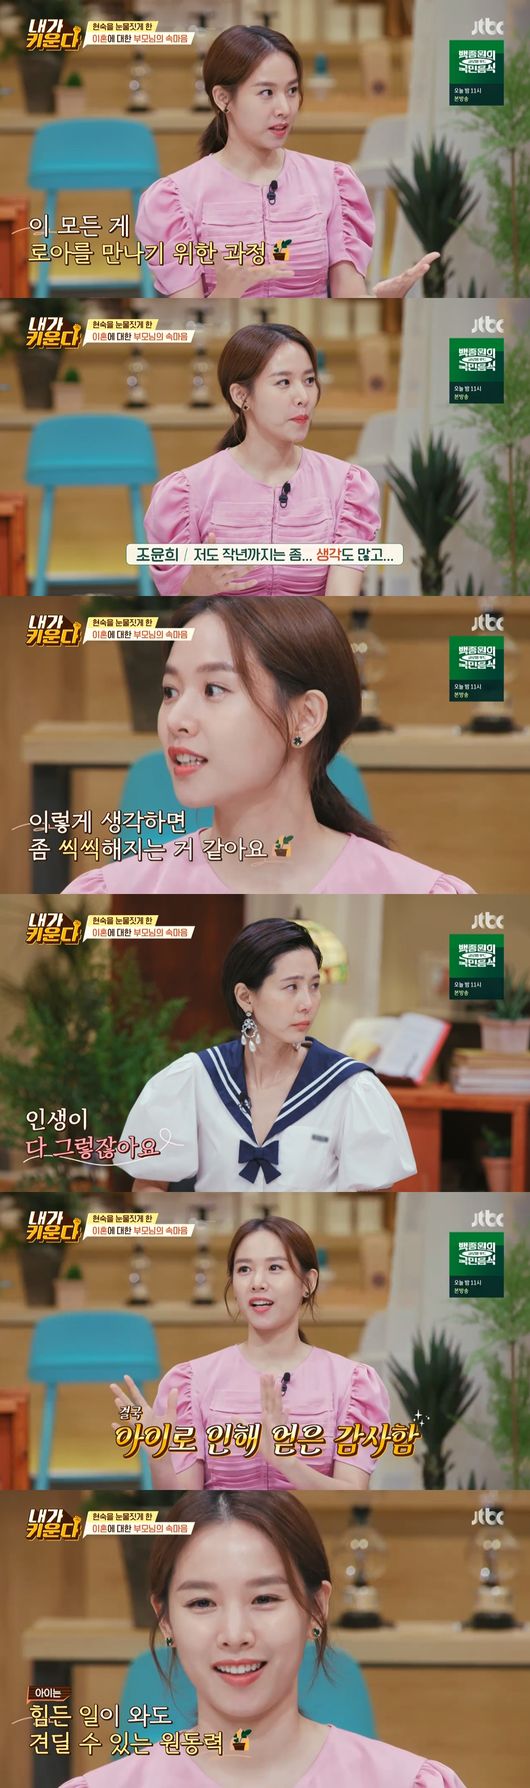 Kim Hyun-Sook, Jo Yoon-hee, Chae Rim and Kim Na-young have spoken out about their ideas about divorce.On the 23rd, JTBC I Raise, Jo Yoon-hee told his thoughts about his divorce while his parents feelings about Kim Hyun-Sooks divorce were revealed.On this day, Kim Hyun-Sook brought out his parents story about his divorce.Kim Hyun-Sook said: Father is so wide and you cant be too hard to come here when youre at your disposal.But he told me that you and Hamin would have a good meaning for coming here. Kim Hyun-Sook said: I got married and had a child and had my family and it seemed like it was too damaging for my mum Father.So I try to do well, but I have my feelings, so I have to do my best to take responsibility for childcare and I have an obsession rather than a hard body. Kim Hyun-Sooks mother told the production team through an interview: My health has become so bad.So I thought how good it would be if there was a direction to save our daughter. My mother said, My mission as a wife and mother is good, but my daughter, who I love and care about, is so hard and hard to die.So I told him to do what you want if its hard enough for me to die, so I decided.Kim Hyun-Sooks father said: I told him Id try to fill in Fathers vacancy if possible.Kim Hyun-Sook, who watched the video, also showed tears; Kim Hyun-Sook said, I tried not to cry.Chae Rim laughed, saying, How did you not cry after taking this picture?Jo Yoon-hee said, I had a lot of thoughts and cried until last year, and I tried to shake it as much as possible. I think these processes are the process to meet Roa.I try to be brave when I think about it. I can endure any hard work if I think about it. Kim Hyun-Sook said, The child liked math, arithmetic. Hamin made Gugudan a surprise by memorizing him.Kim Na-young said, Hamin has a reversal charm. Kim Hyun-Sook said, I sent it to Milyang and one day I was remembering Gugudan.My mother has an education channel on YouTube, and I think she told me that. Kim Hyun-Sook began to read books by playing a one-man multiplayer while putting Son Hamin to bed; Kim Na-young said, That book should be removed.It is too long, said Kim Hyun-Sook, who was more excited and read the book hard and laughed.I was immersed in it, Kim Hyun-Sook said.But Hamin said he would jump up and take a shower, with Kim Hyun-Sook laughing, saying, I think Im holding it because its my child, if it was a brother or a husband.Kim Hyun-Sook said, It is always difficult not only today but also today. Child care is not a meat loss. I want to fill it without shortage, but there will be a shortage.That part will try to make me work harder, he said.